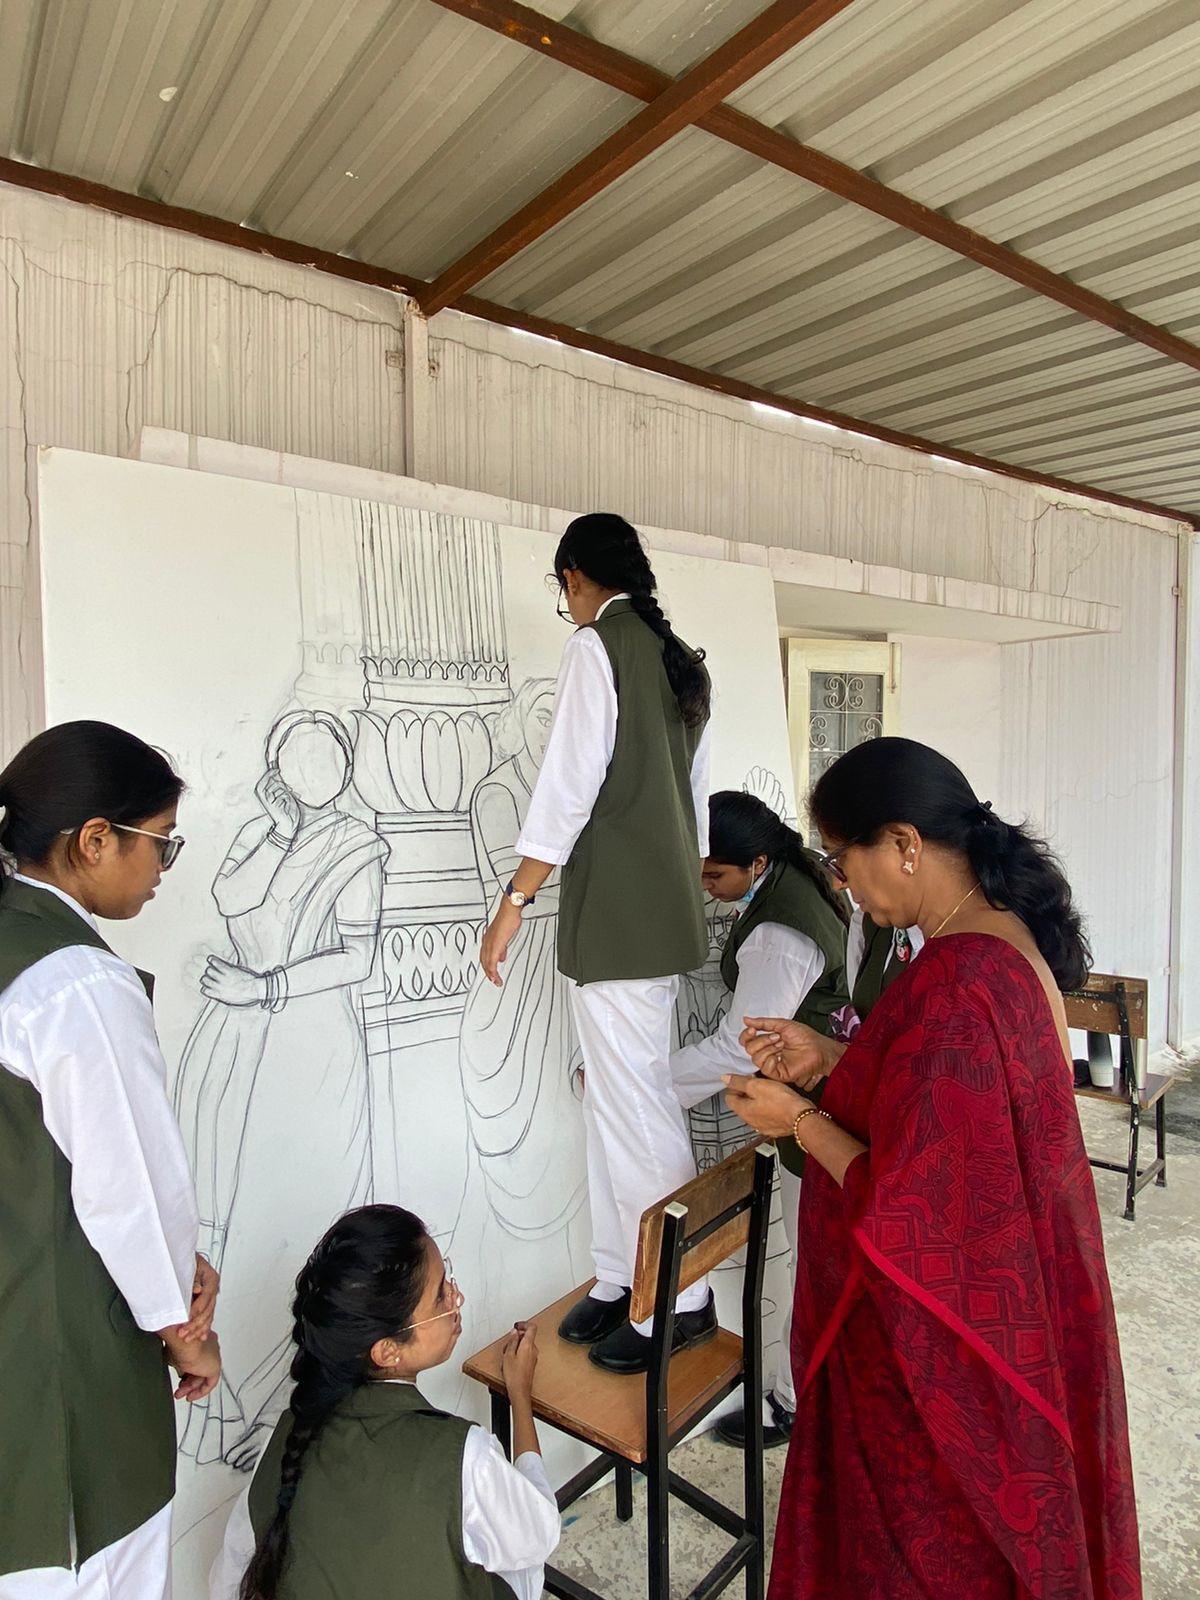 Students in the workshop (file photo.)